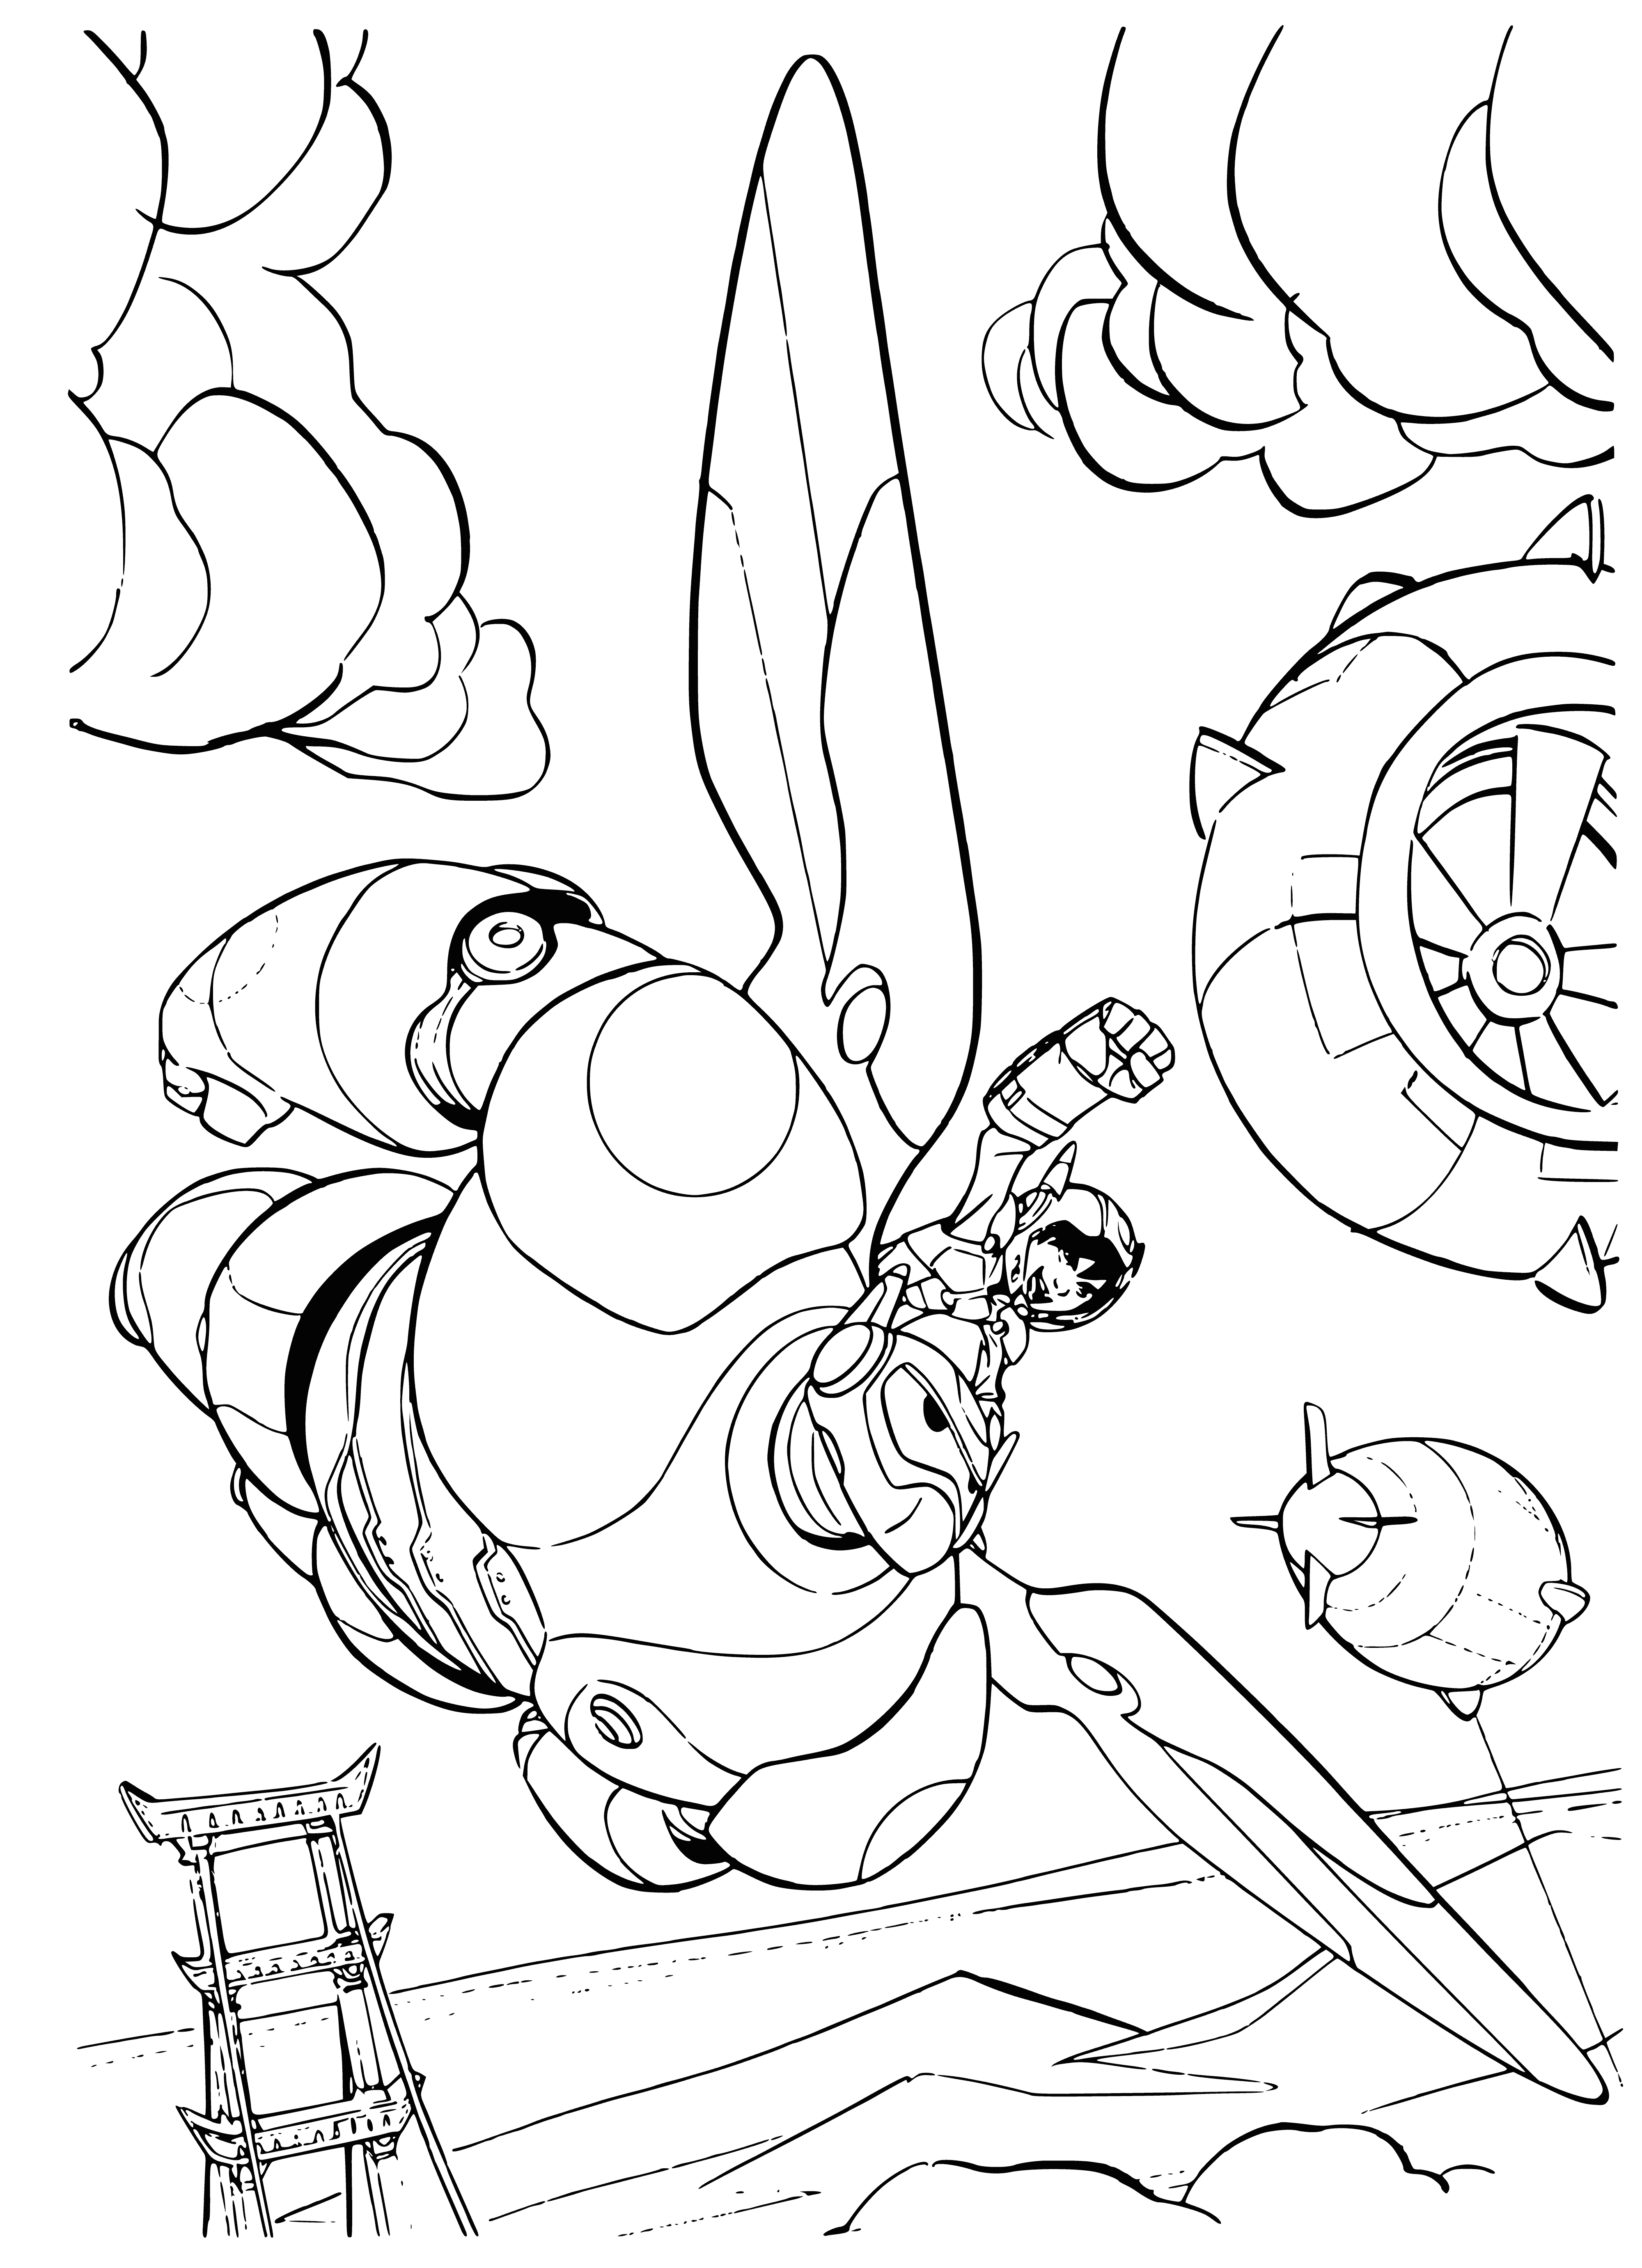 coloring page: Hiro and Baymax save citizens from a burning building with jetpacks.